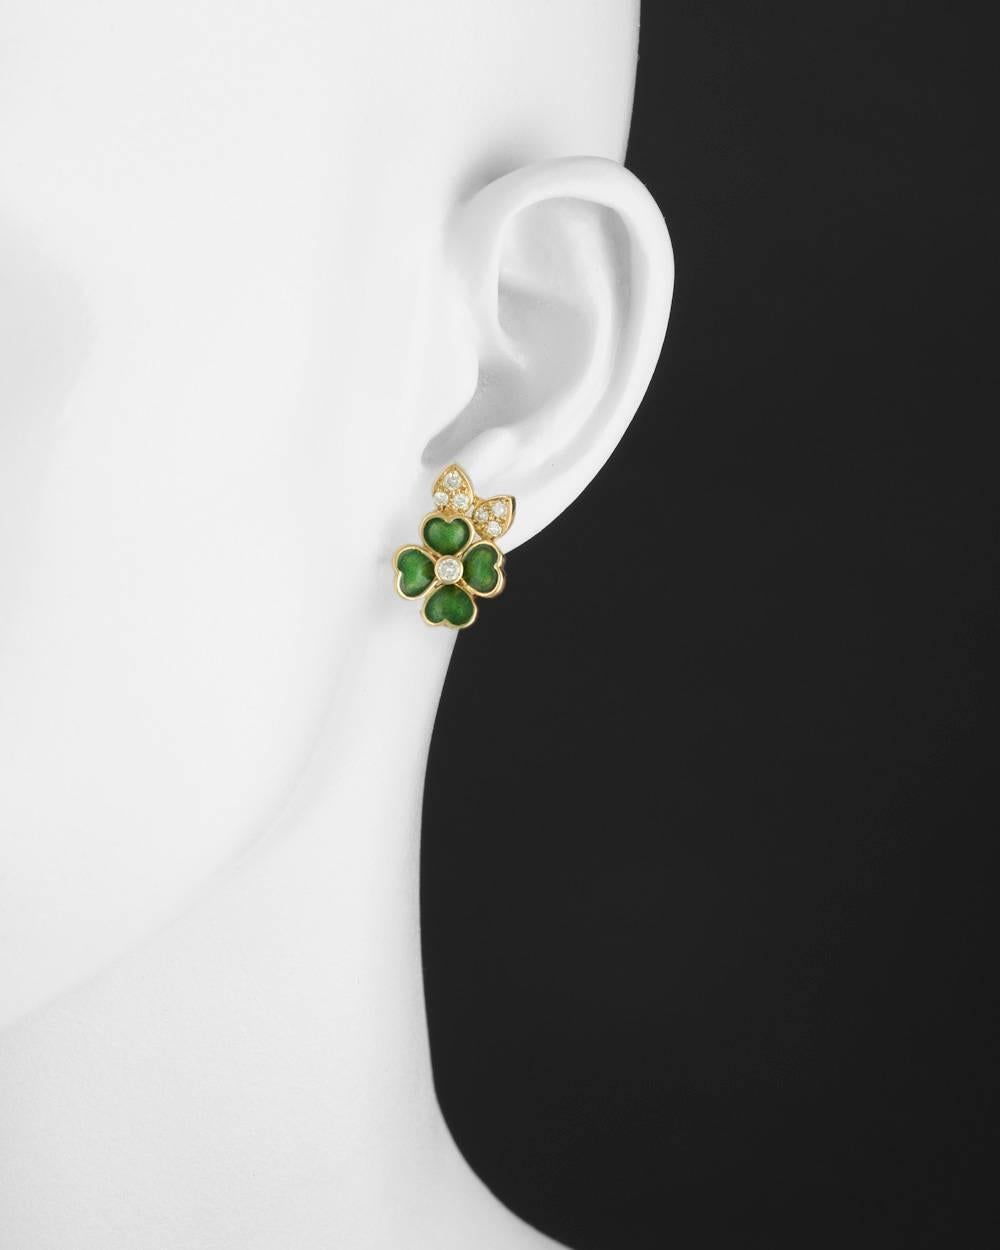 Four-leaf clover earclips, designed with two pavé-set diamond leaves astride an elegant four-leaf clover motif, the clover decorated with green enamel petals and centering a larger round diamond, with clip backs, numbered A703-914, signed